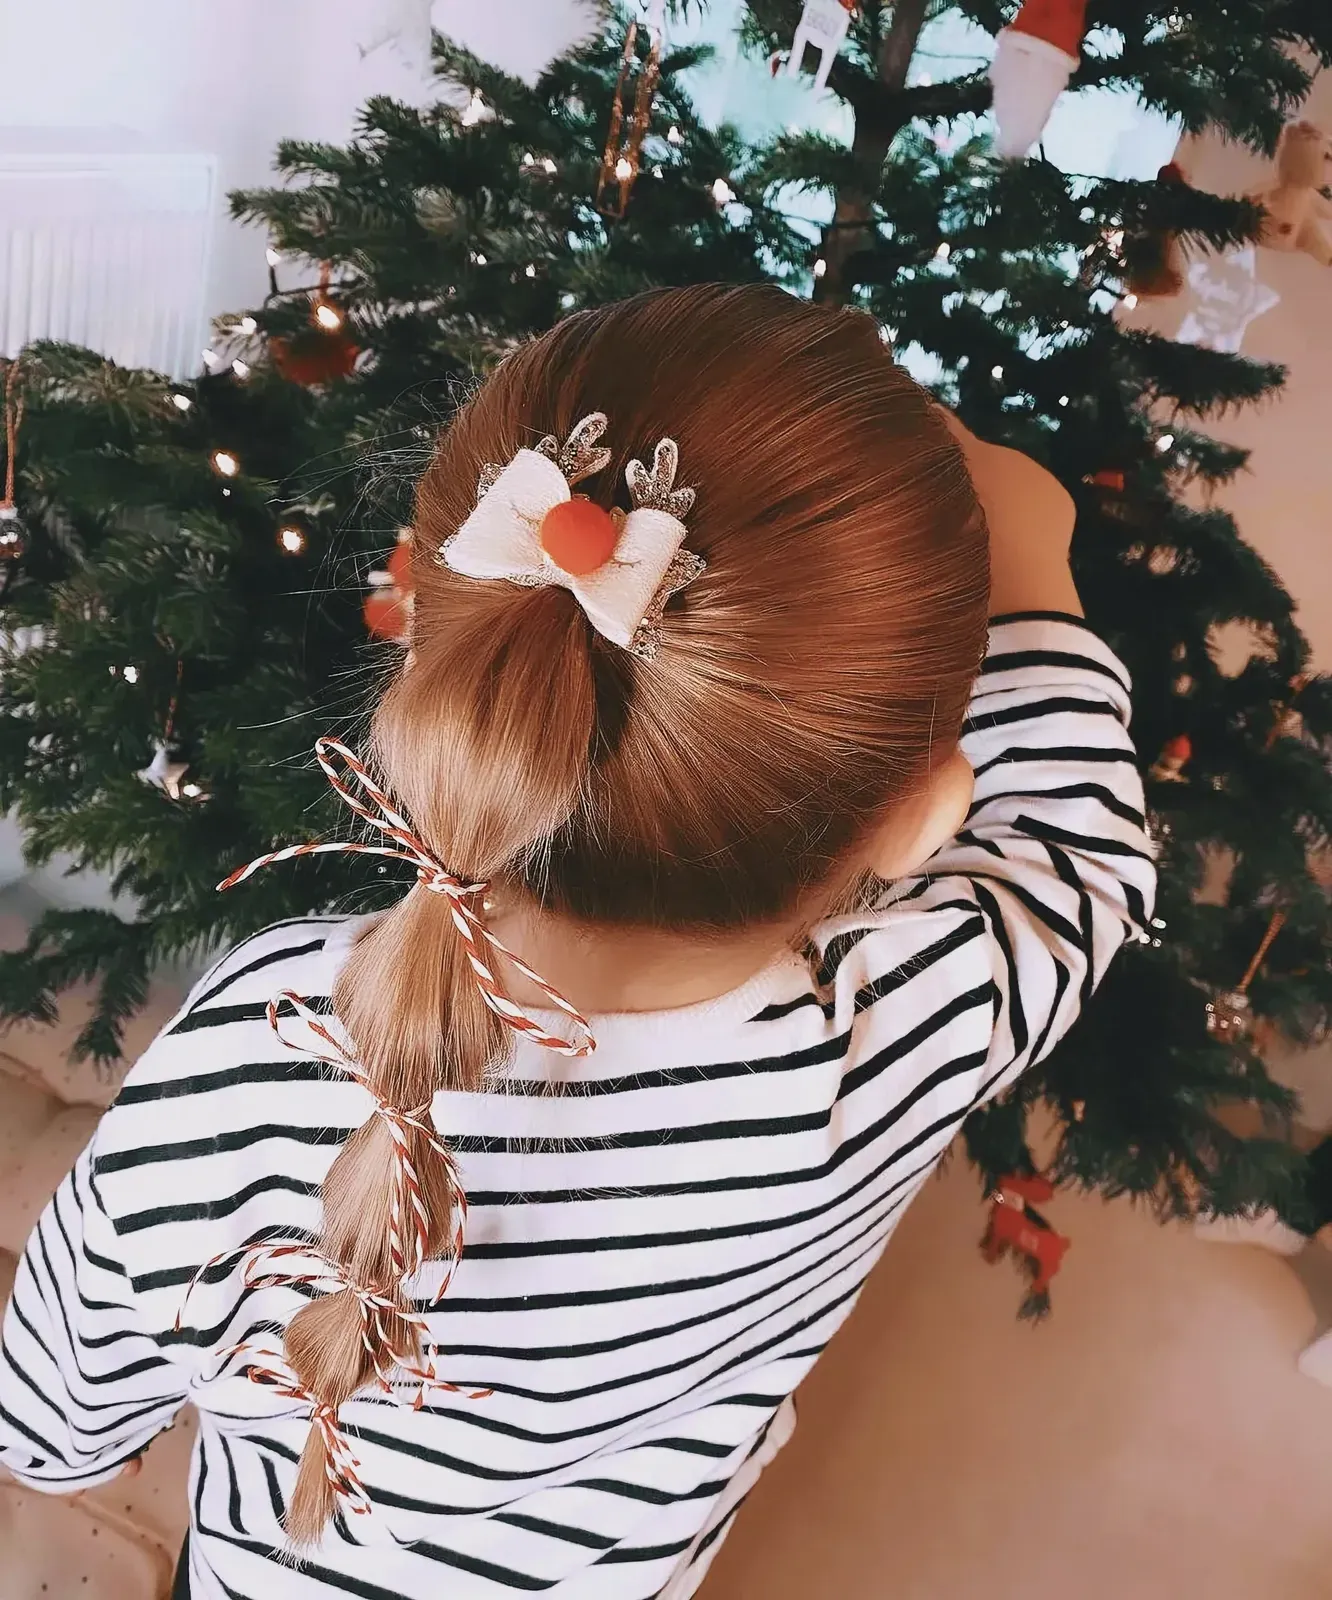 Young girl with festive Christmas hairstyle near a decorated Christmas tree